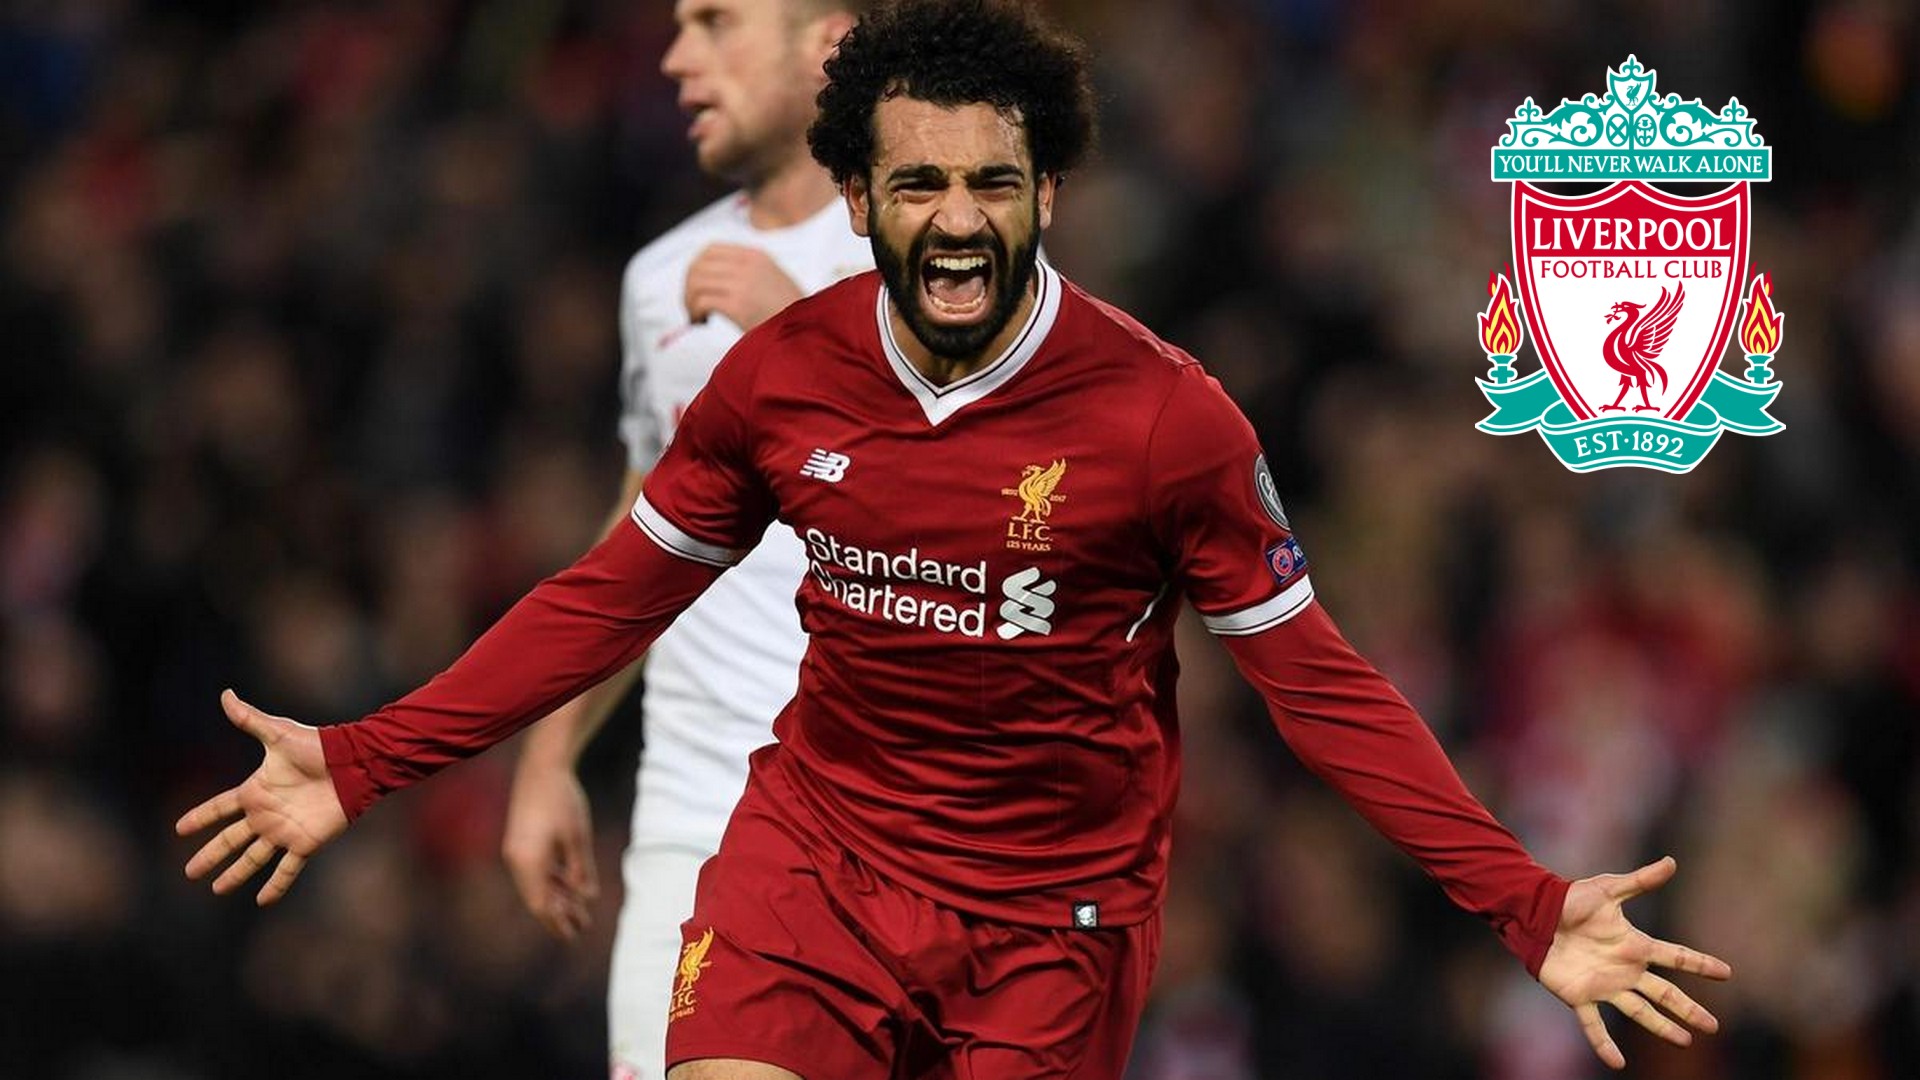 Best Mohamed Salah Liverpool Wallpaper with image resolution 1920x1080 pixel. You can use this wallpaper as background for your desktop Computer Screensavers, Android or iPhone smartphones